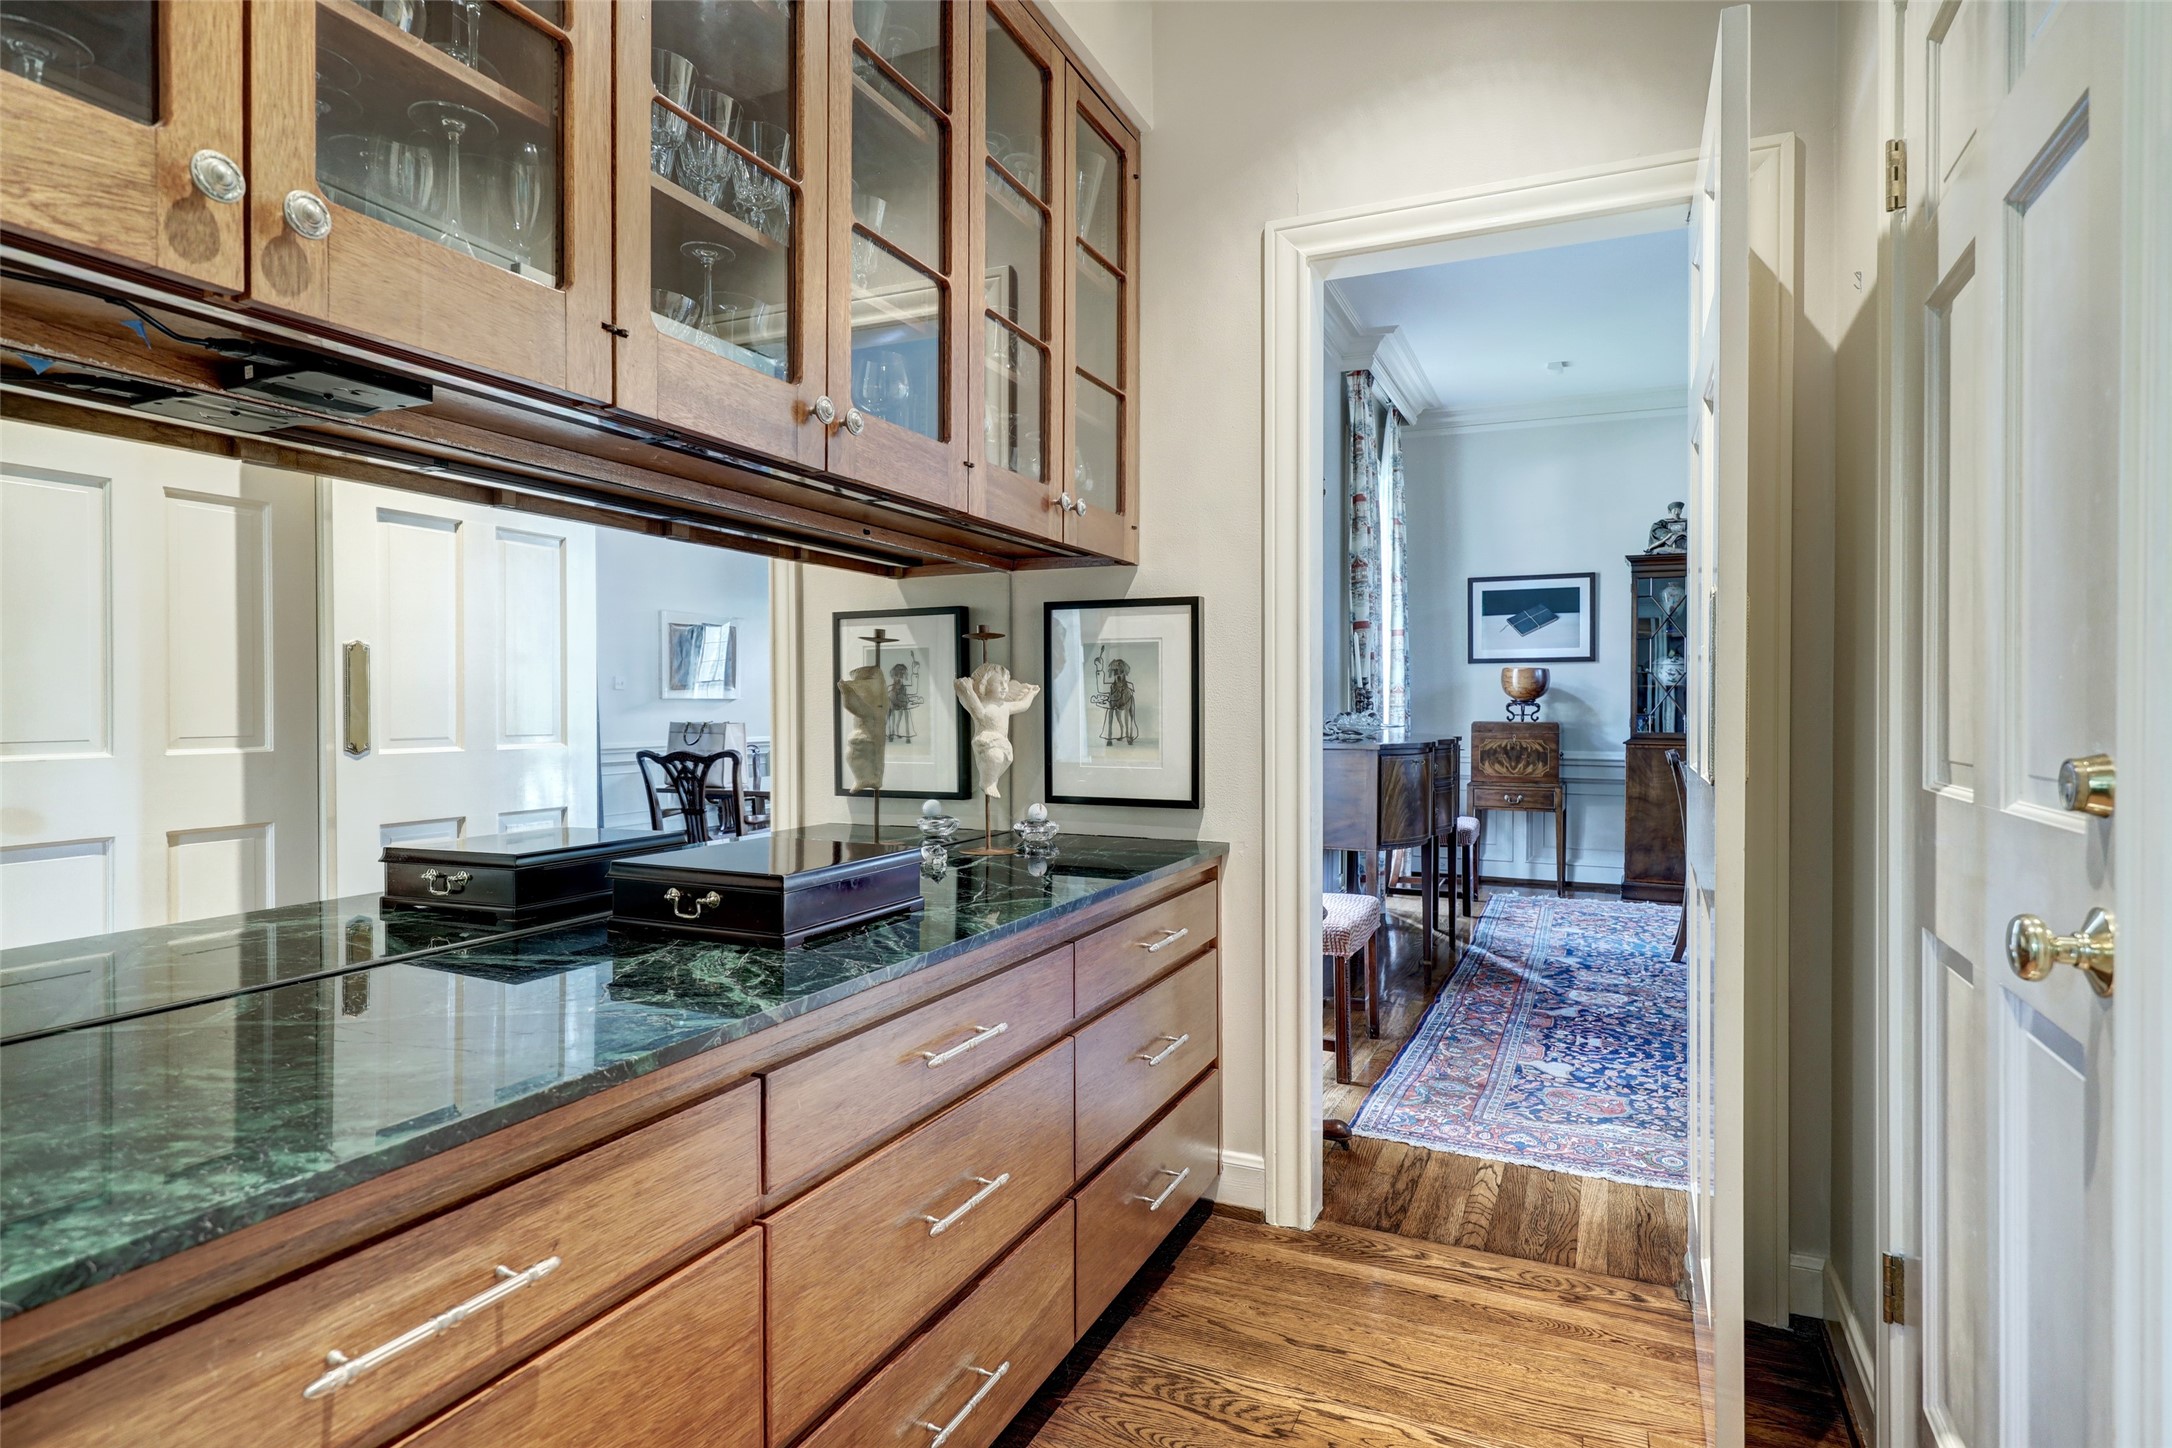 The butler's pantry, nestled between the dining room and kitchen, offers abundant cabinet and drawer storage, providing a practical and stylish space for meal preparation and storage needs.